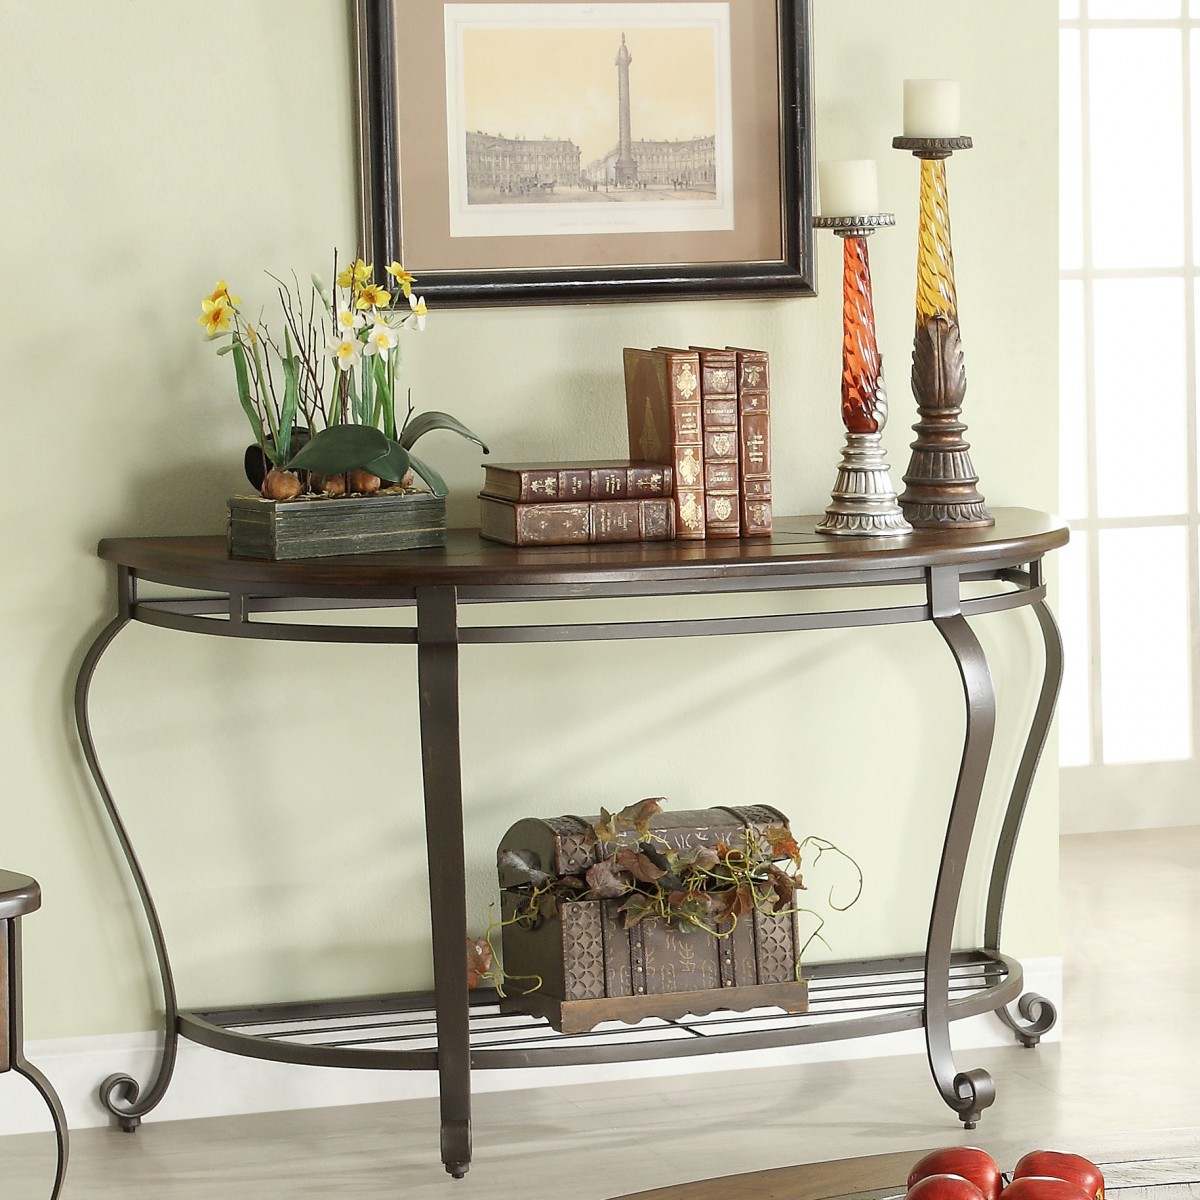 A Versatile and Stylish Console Table.